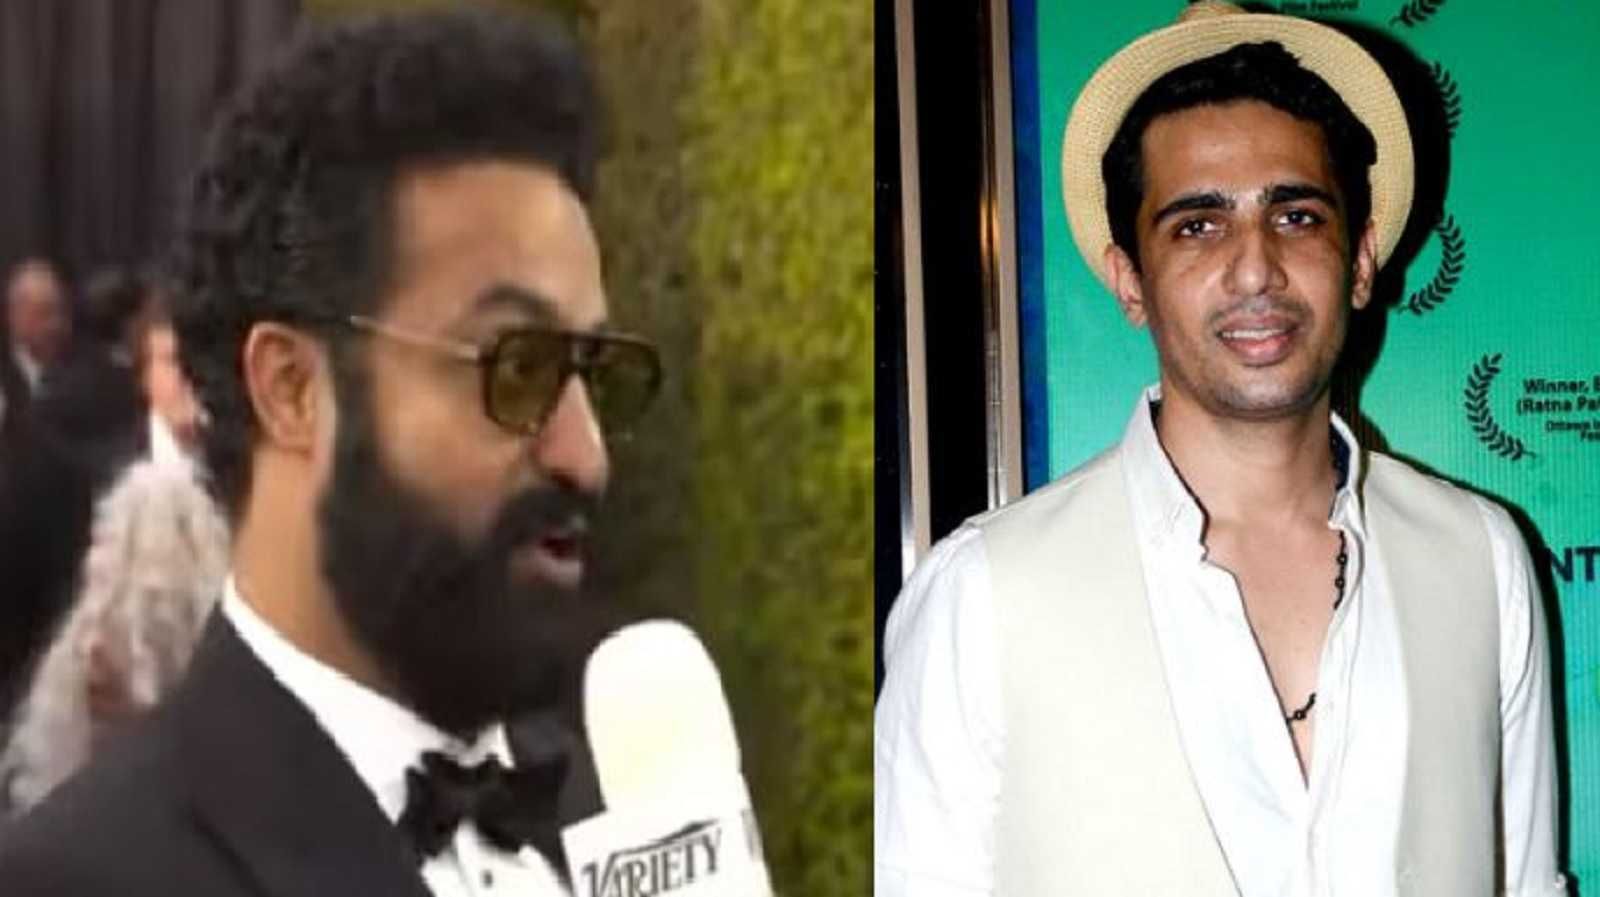 We will stand to gain from it': Jr NTR's 'fake' accent at Golden Globes trolled, Gulshan Devaiah defends